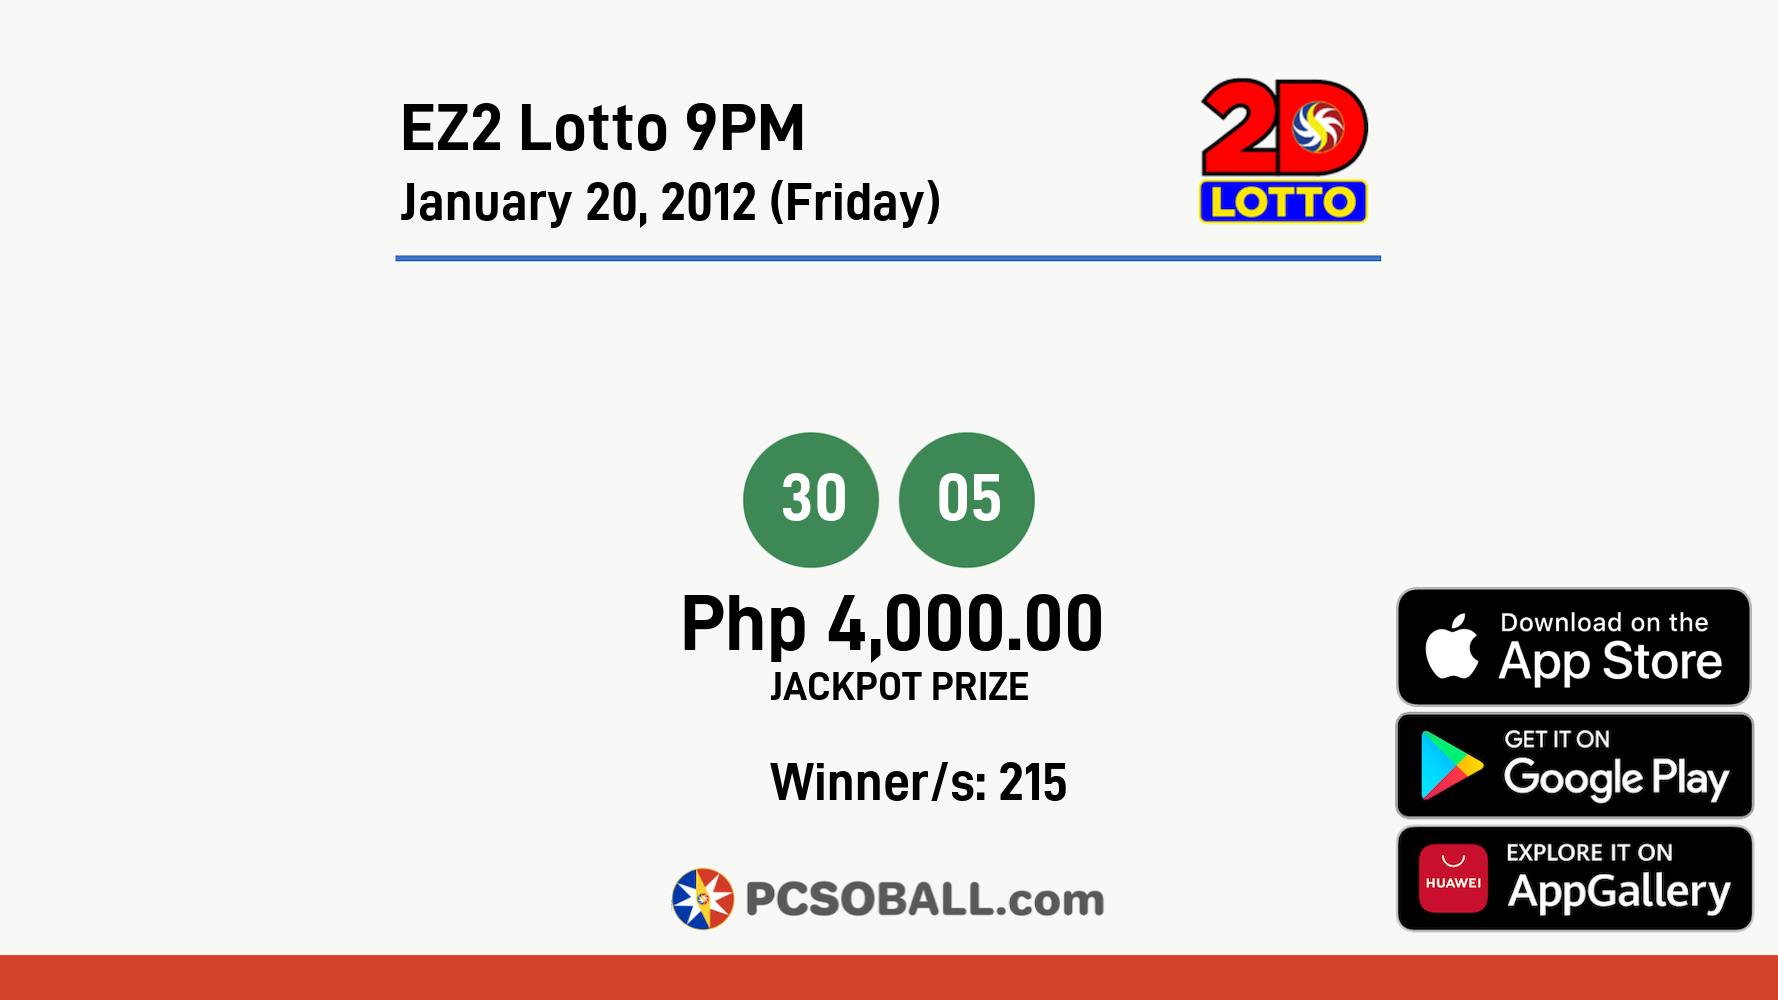 EZ2 Lotto 9PM January 20, 2012 (Friday) Result